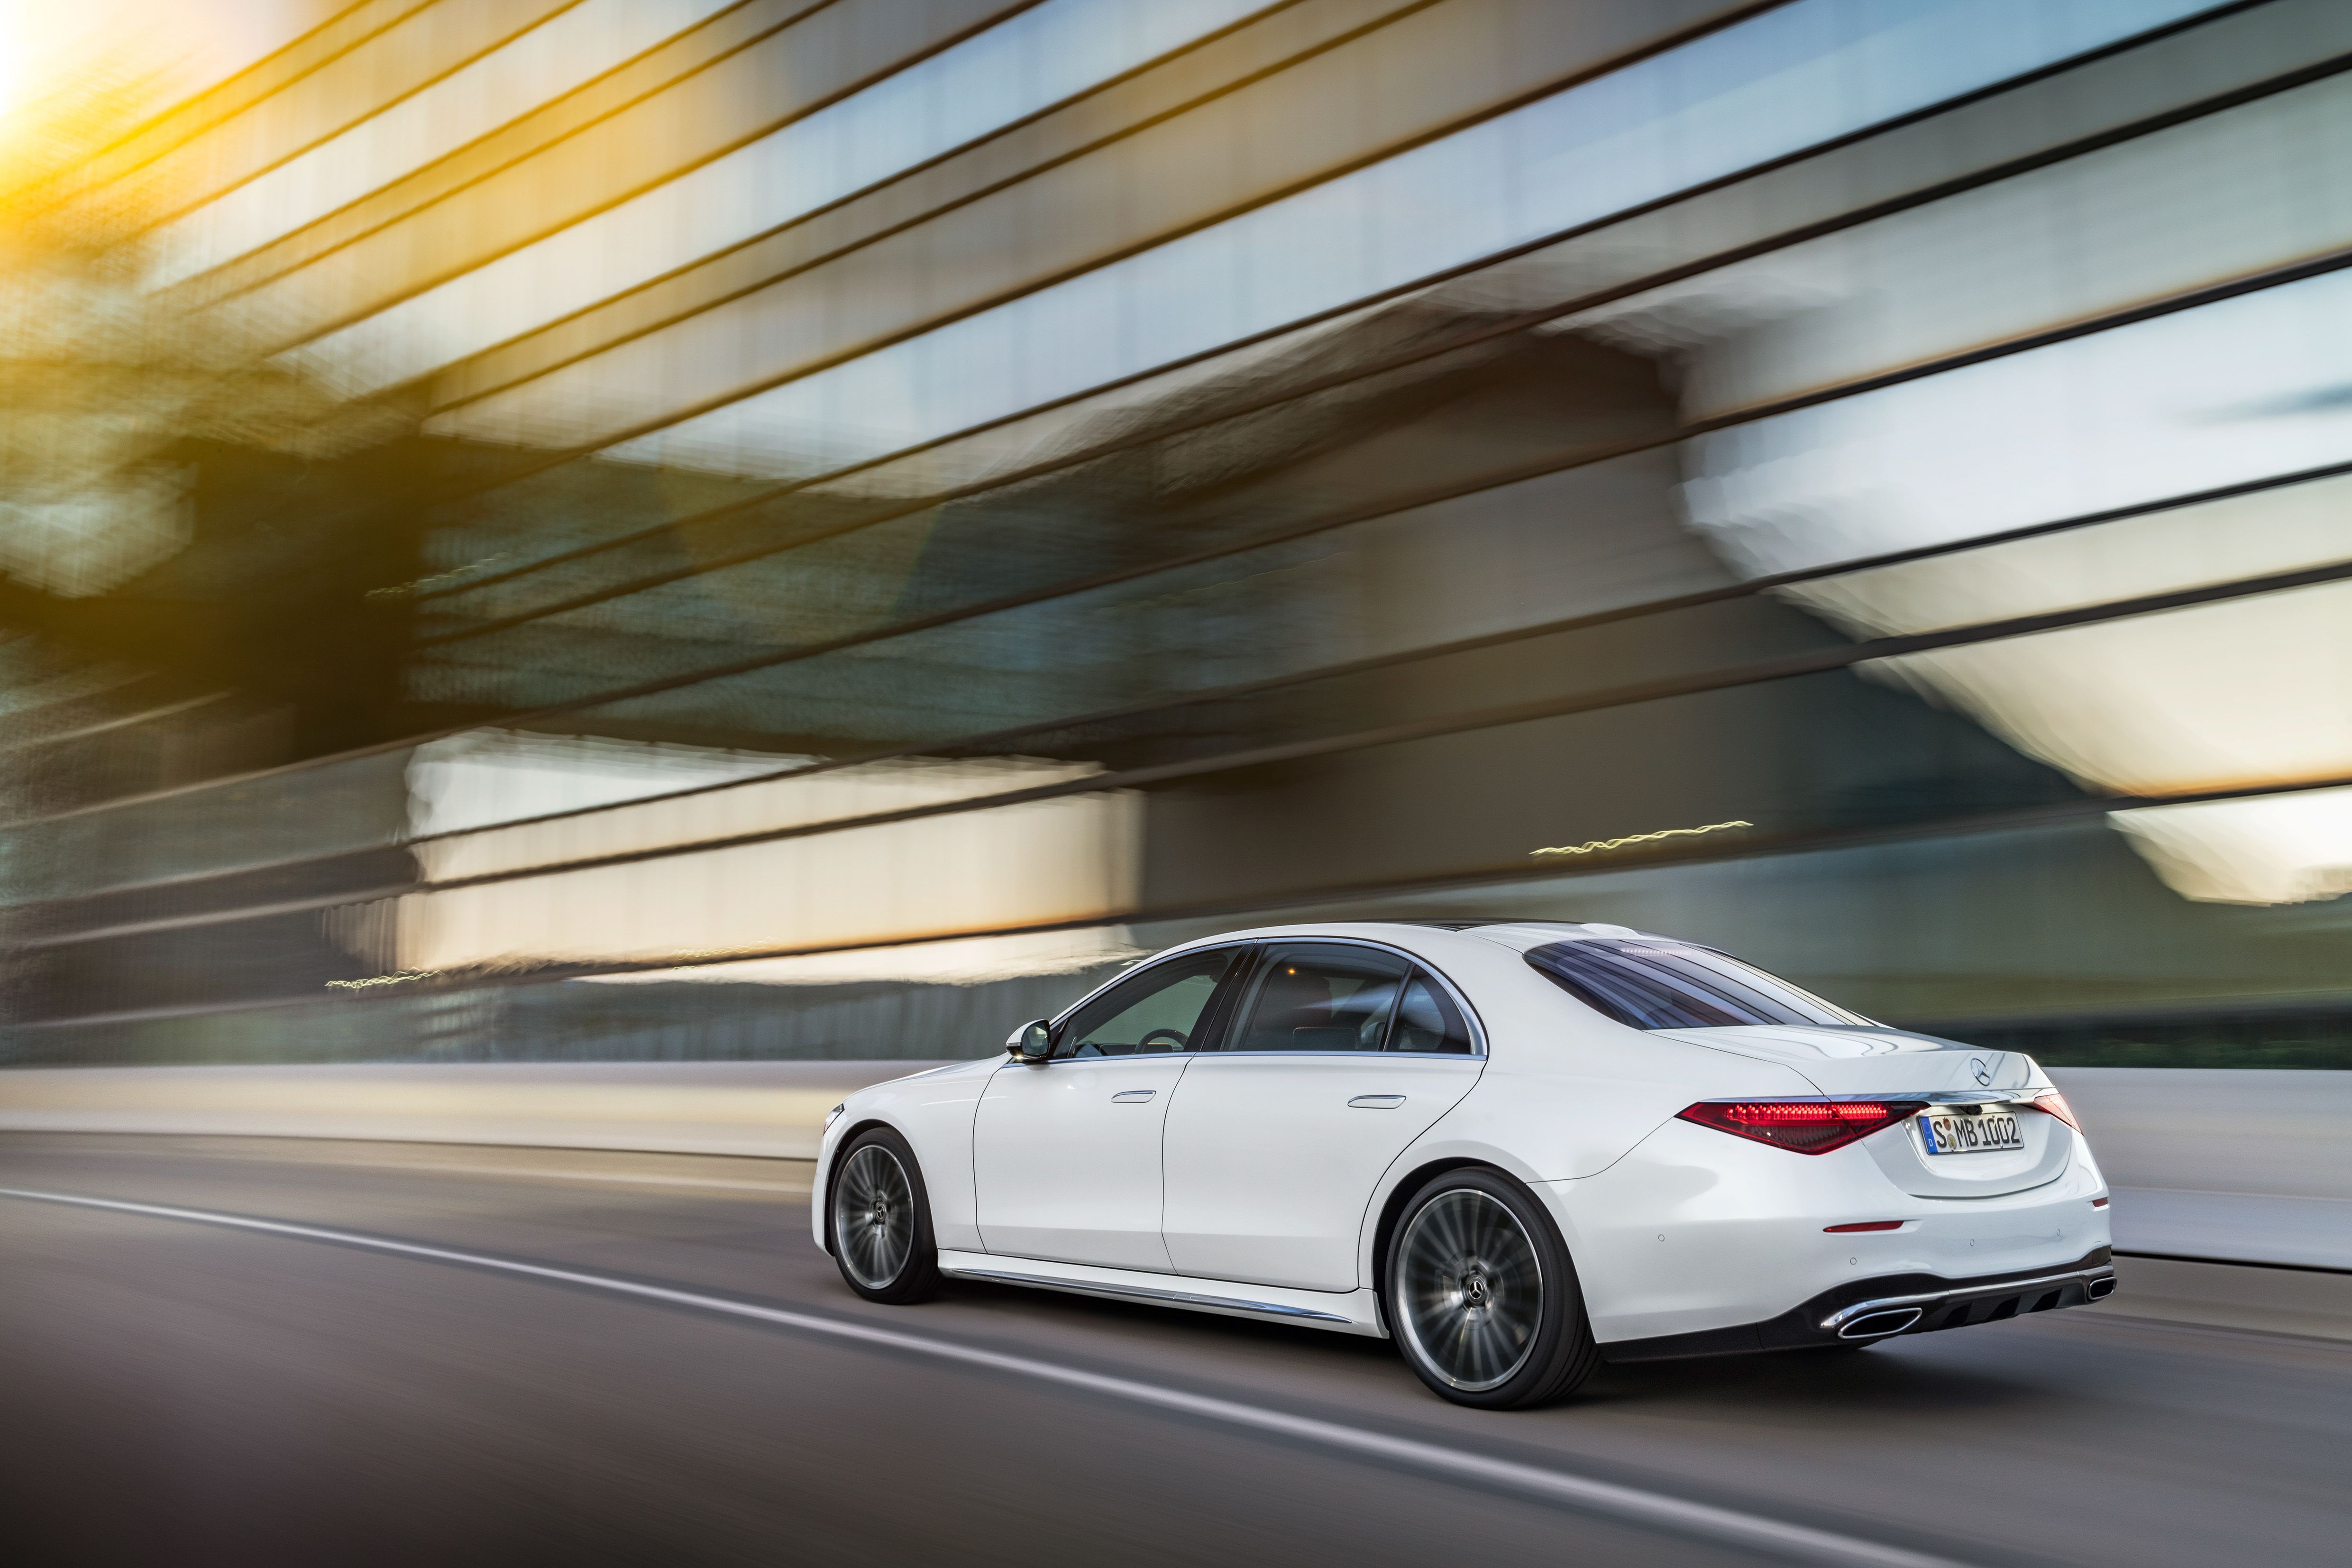 21 Mercedes S Class Raises Safety Levels For The Luxury Class